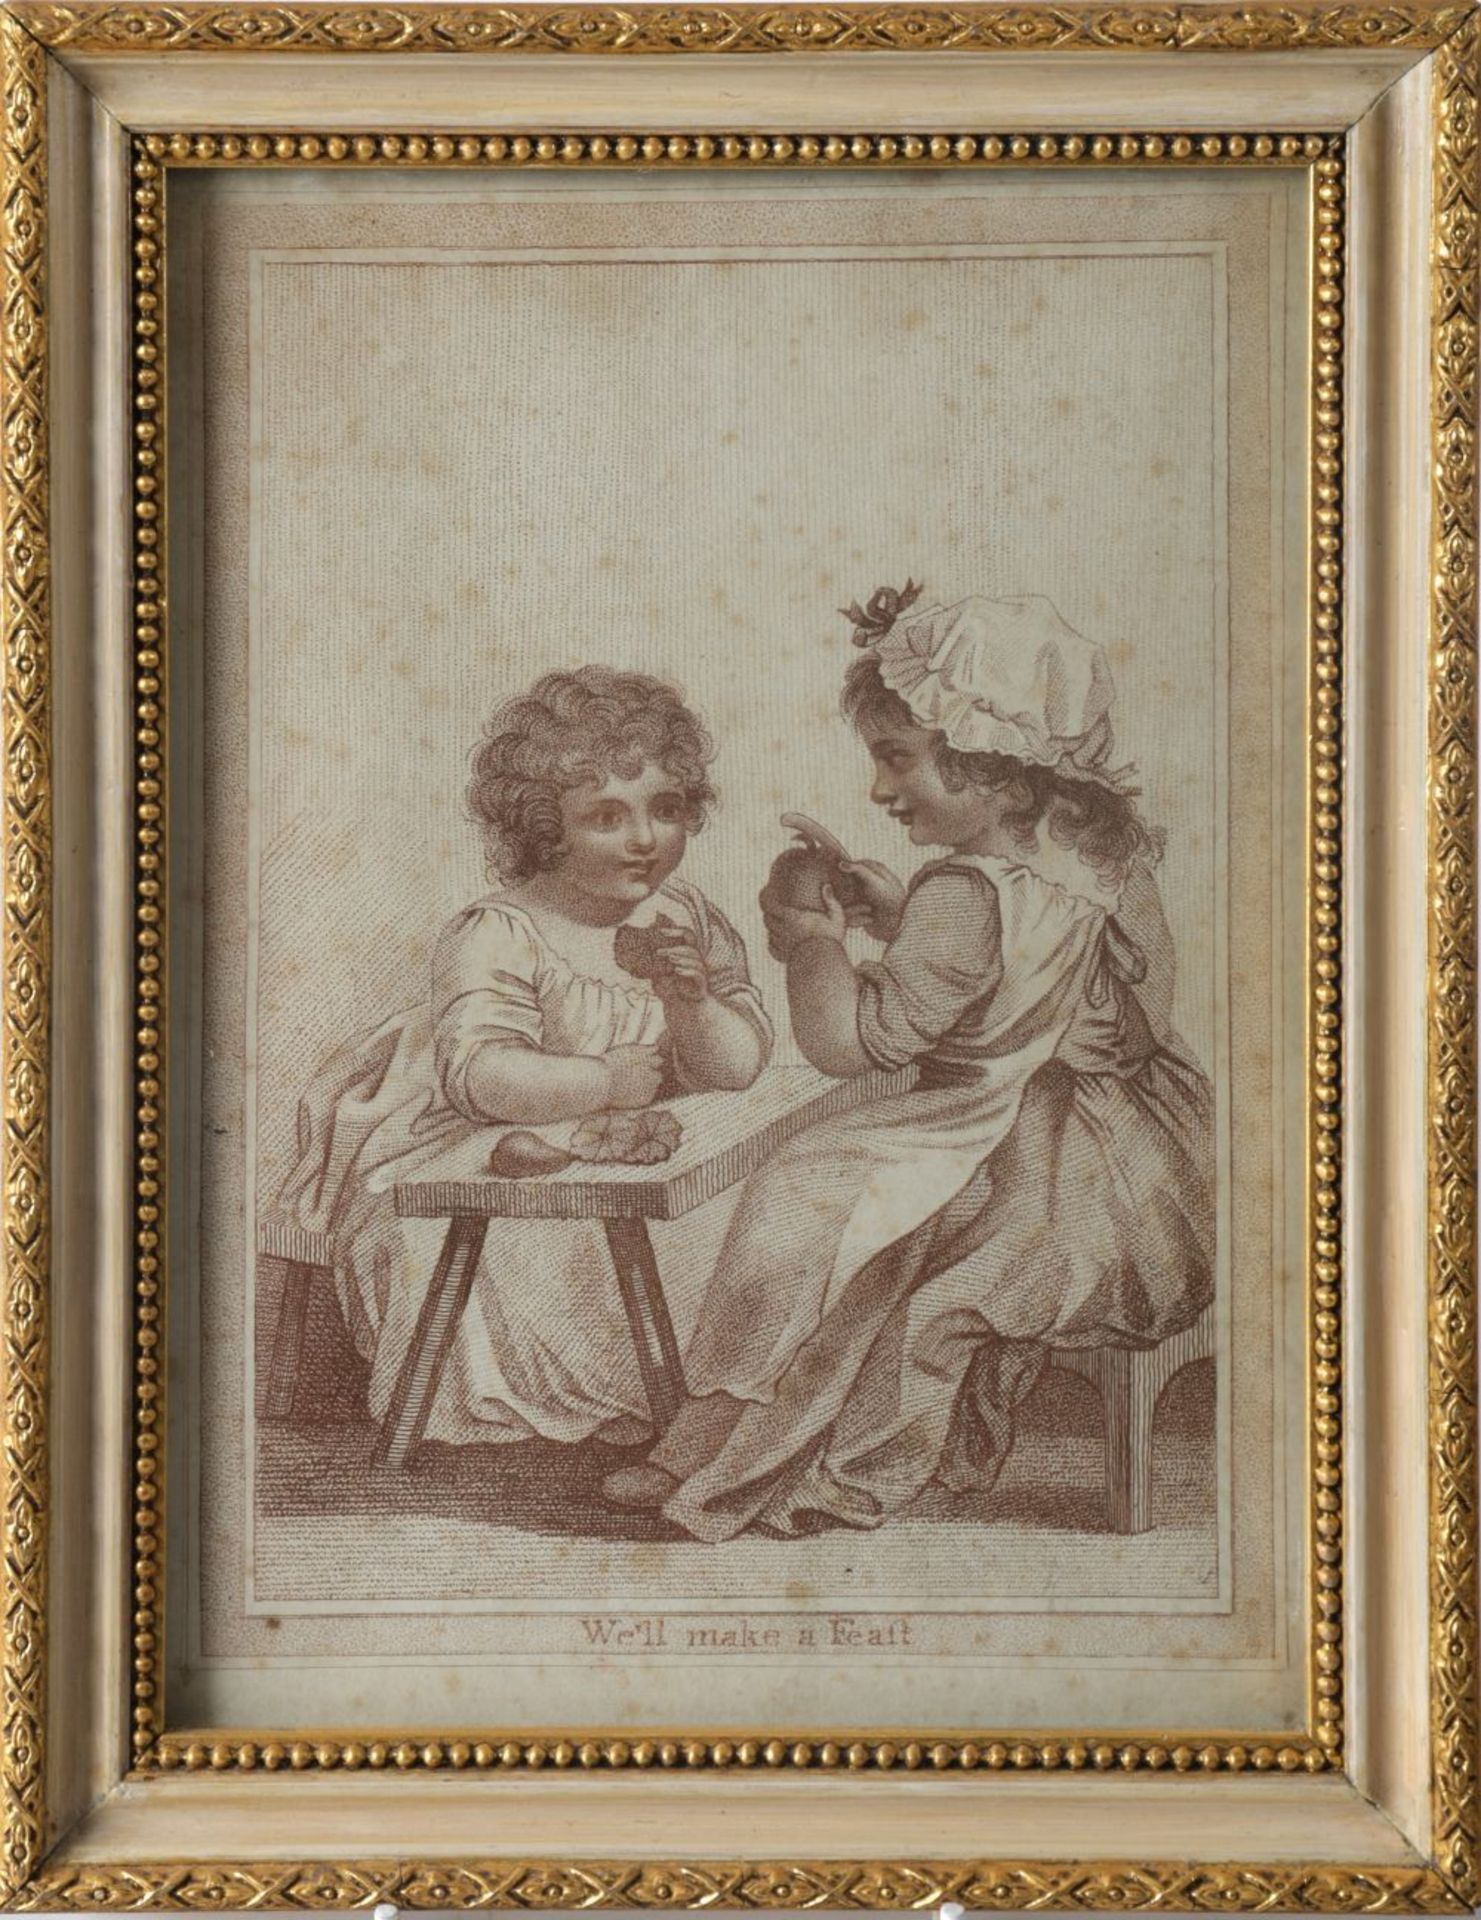 SET OF 4 18TH-CENTURY PATRICK MAGUIRE ENGRAVINGS - Image 3 of 4